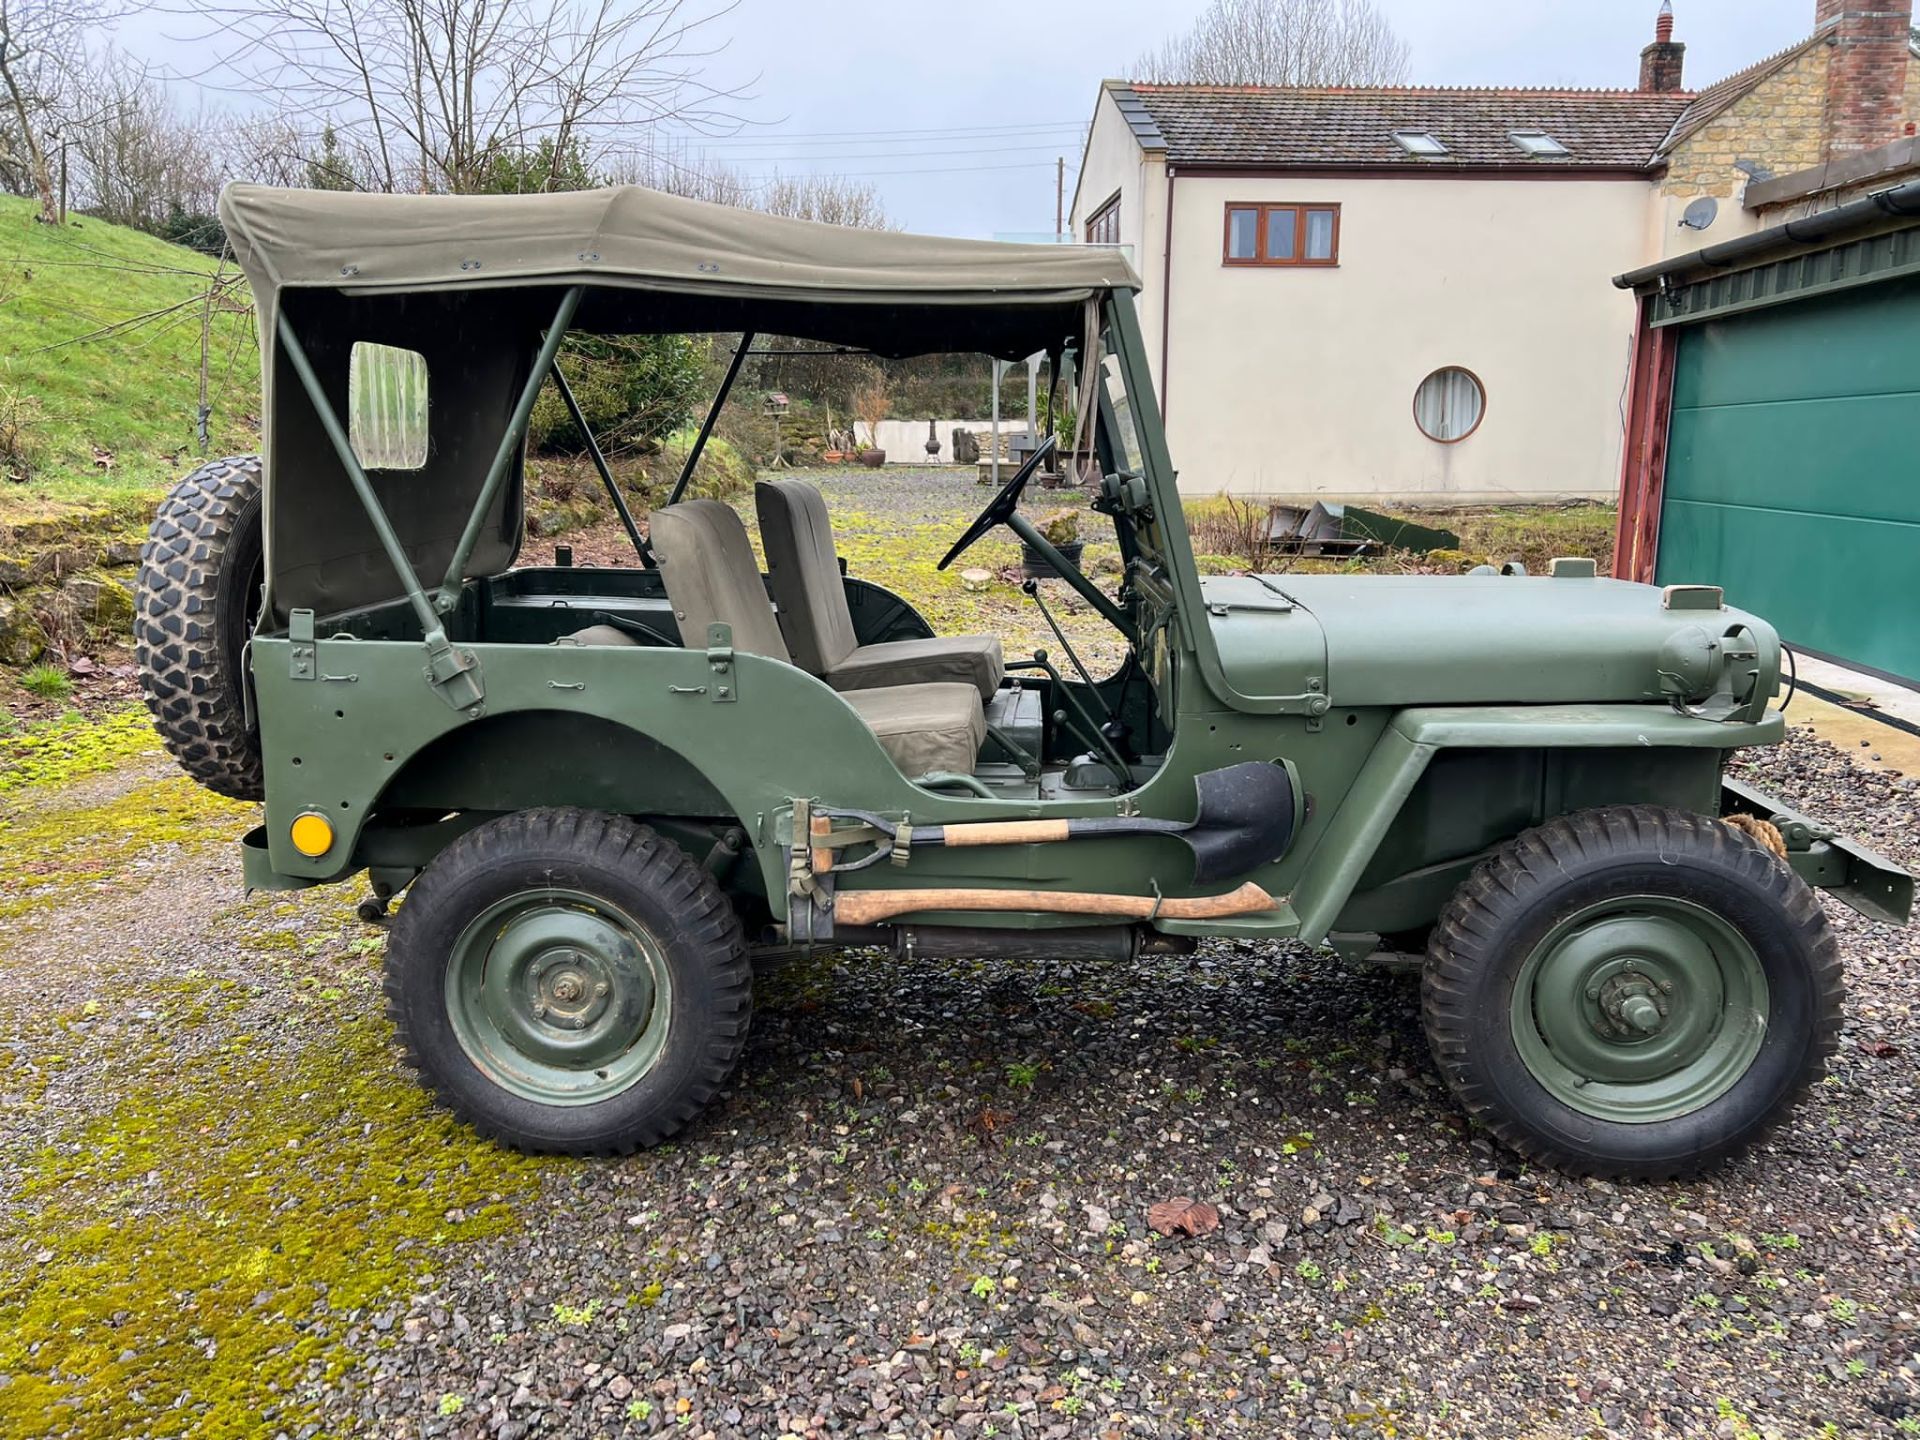 1945 Willys Jeep - Military Vehicle - Restored and raring to go... - Bild 7 aus 13